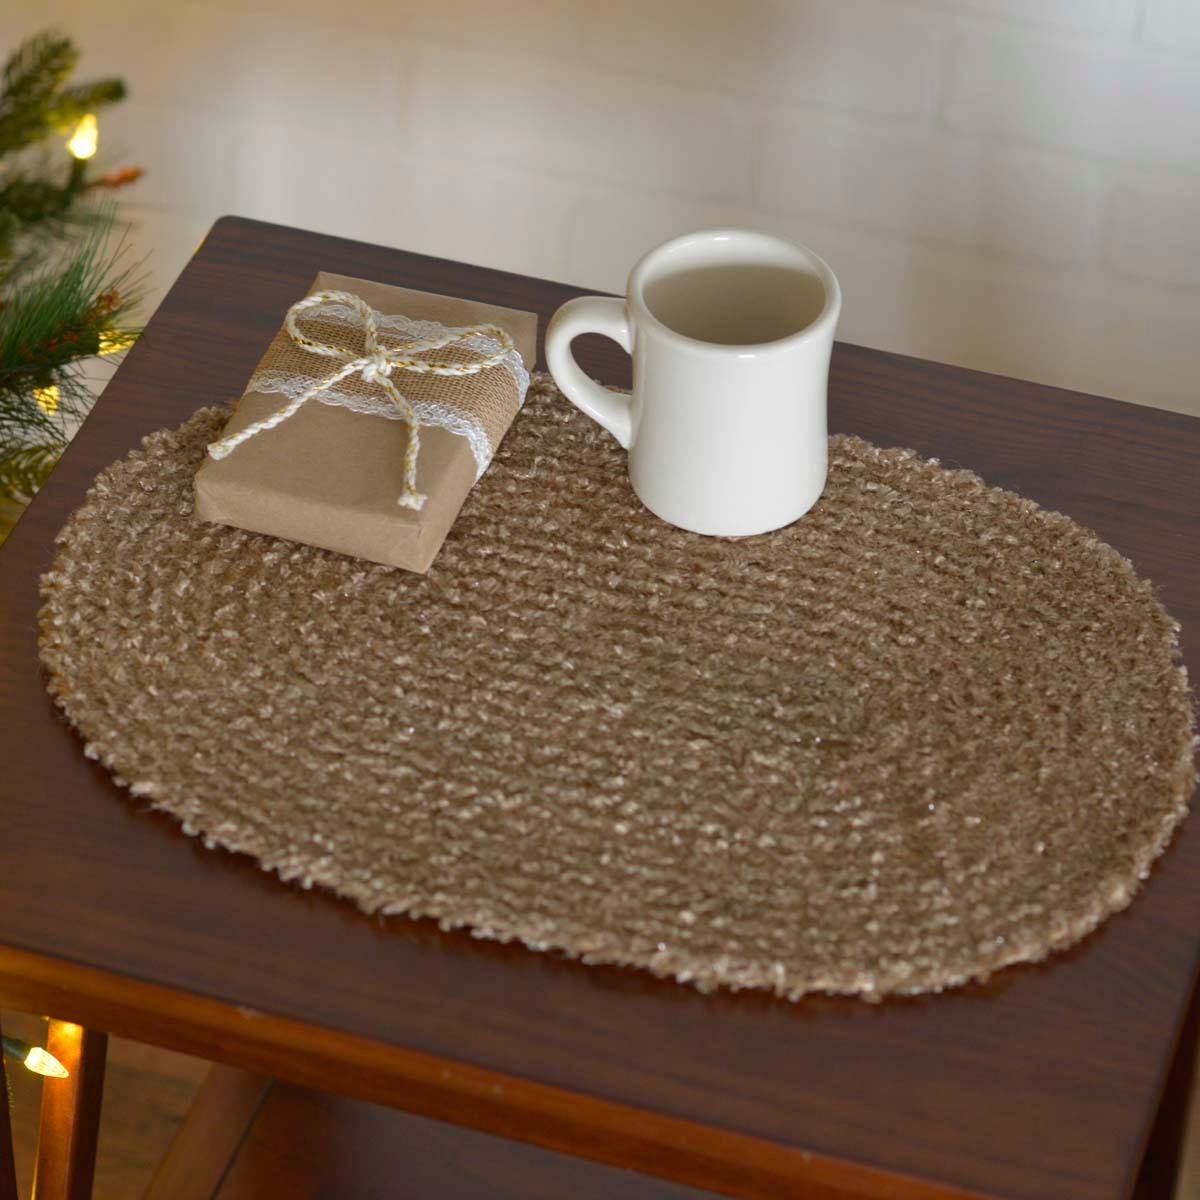 Dyani Champagne Jute Braided Placemat Set of 6 VHC Brands - The Fox Decor